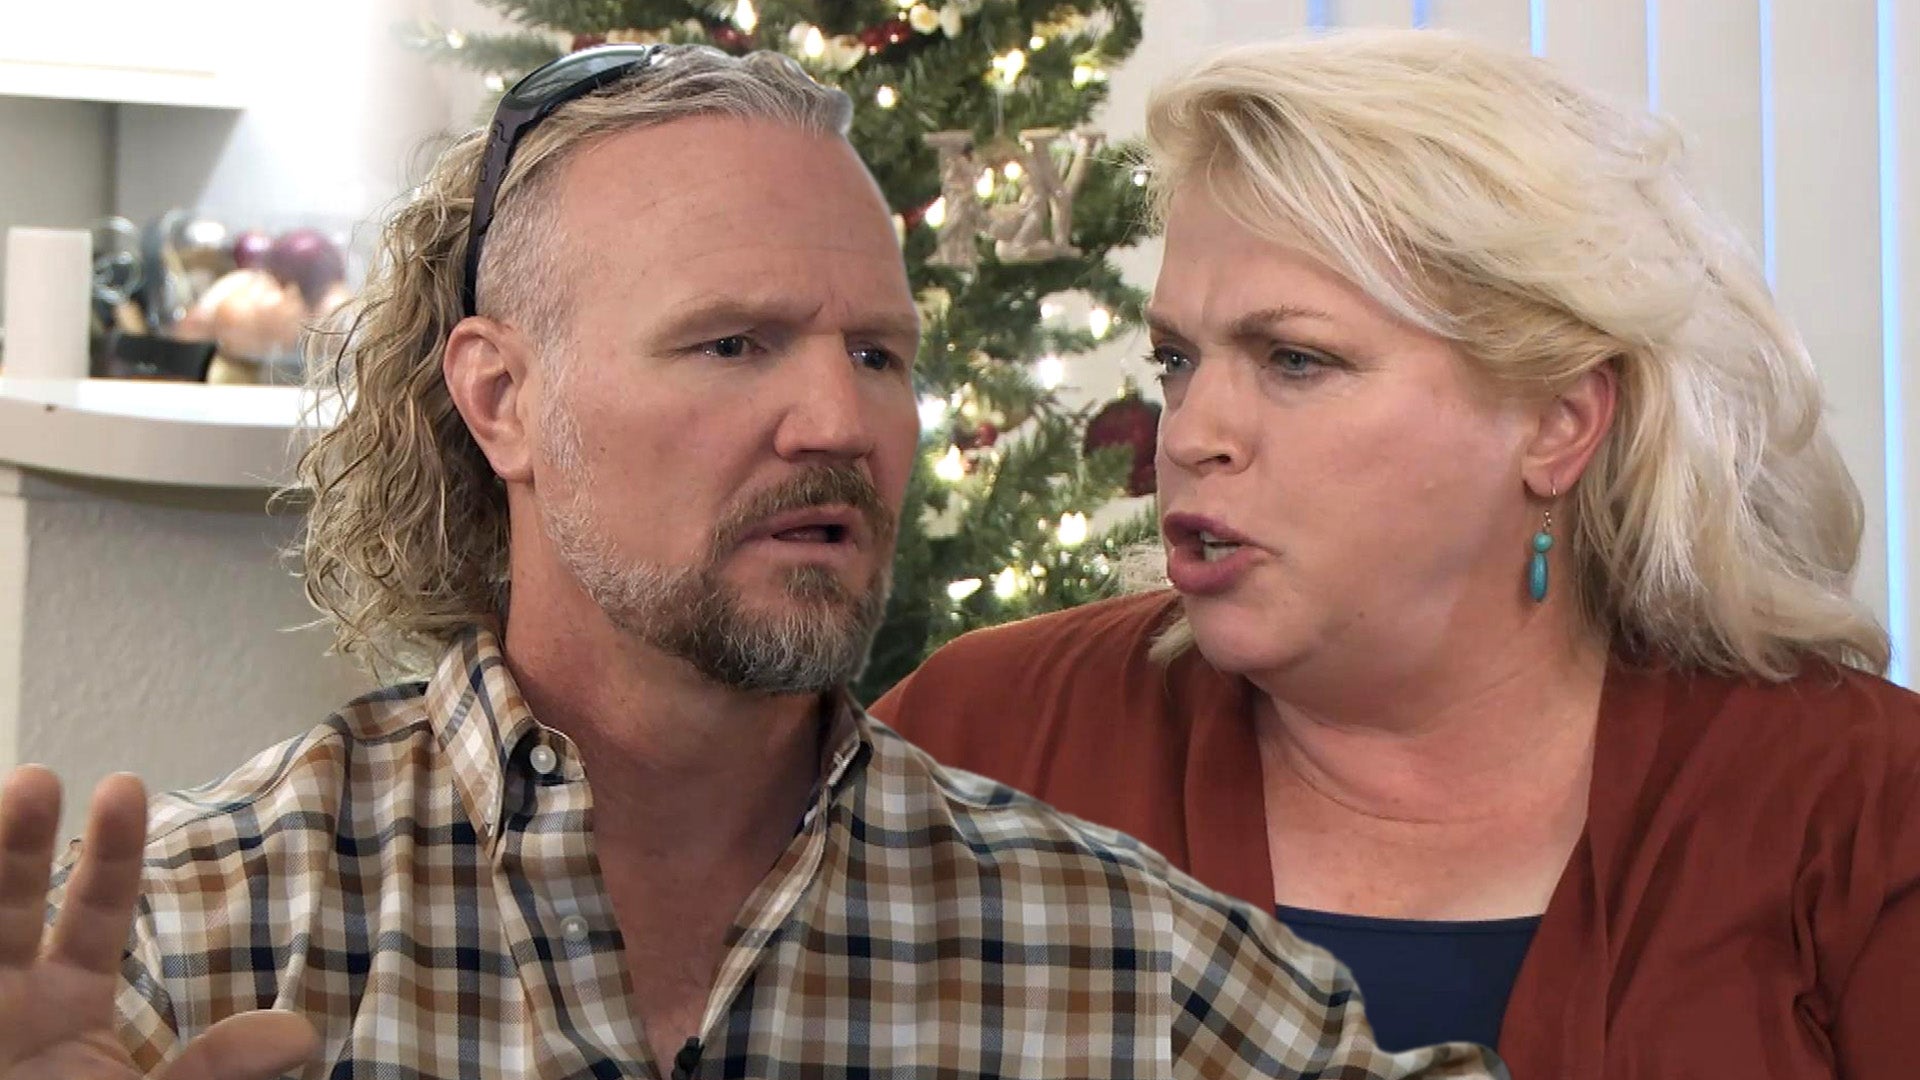 Sister Wives' Star Janelle Brown Says Christine Brown's New Relationship  'Gives Me All the Feels' | Entertainment Tonight